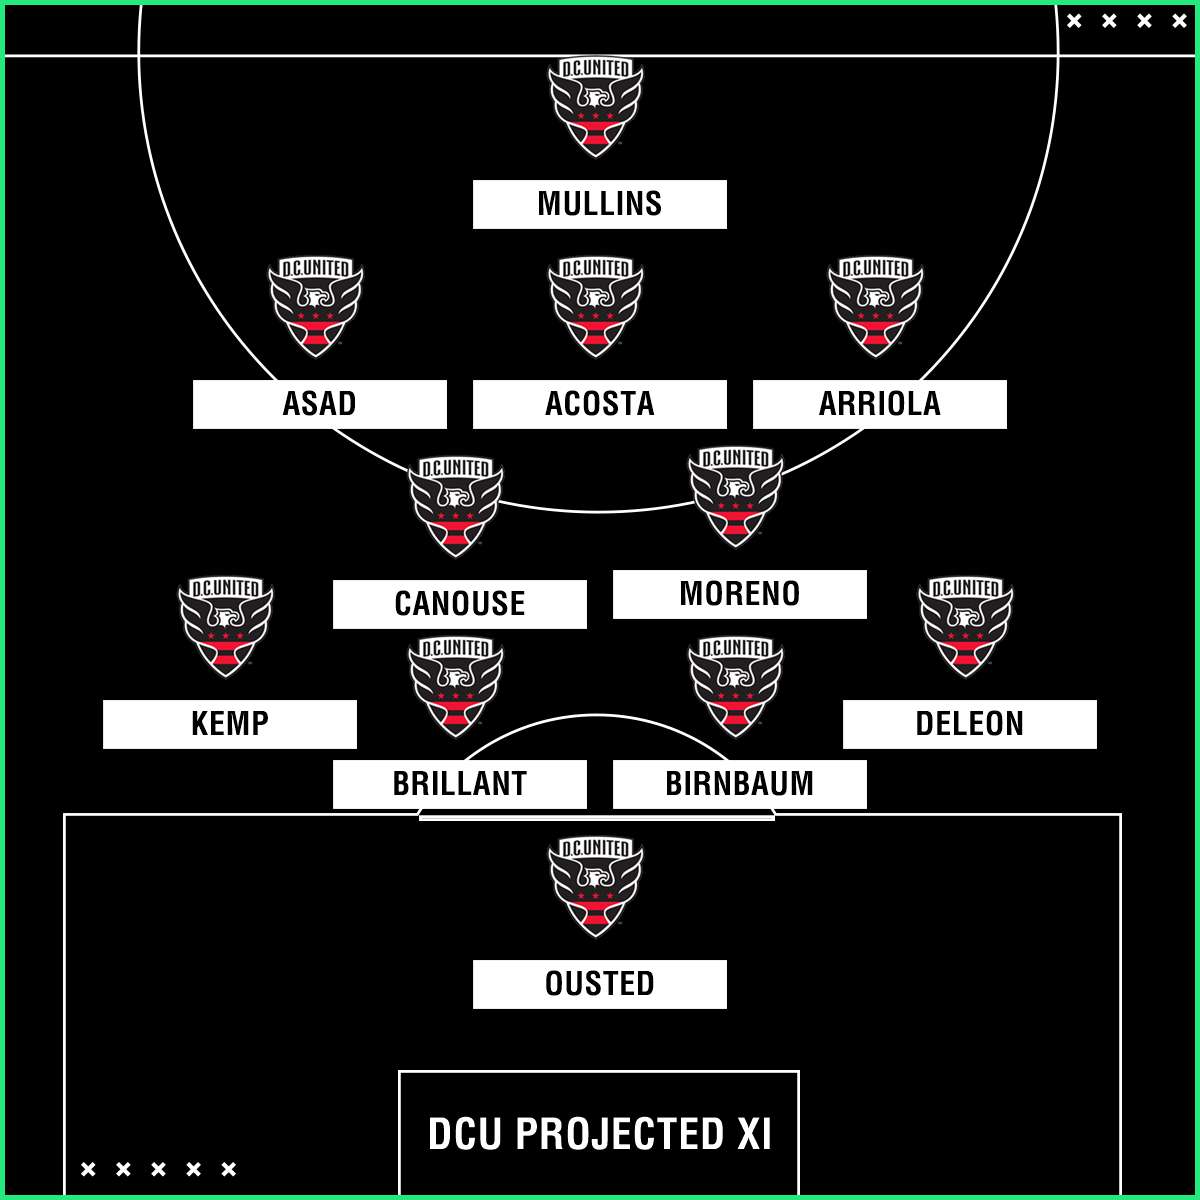 D.C. United 2018 projected lineup